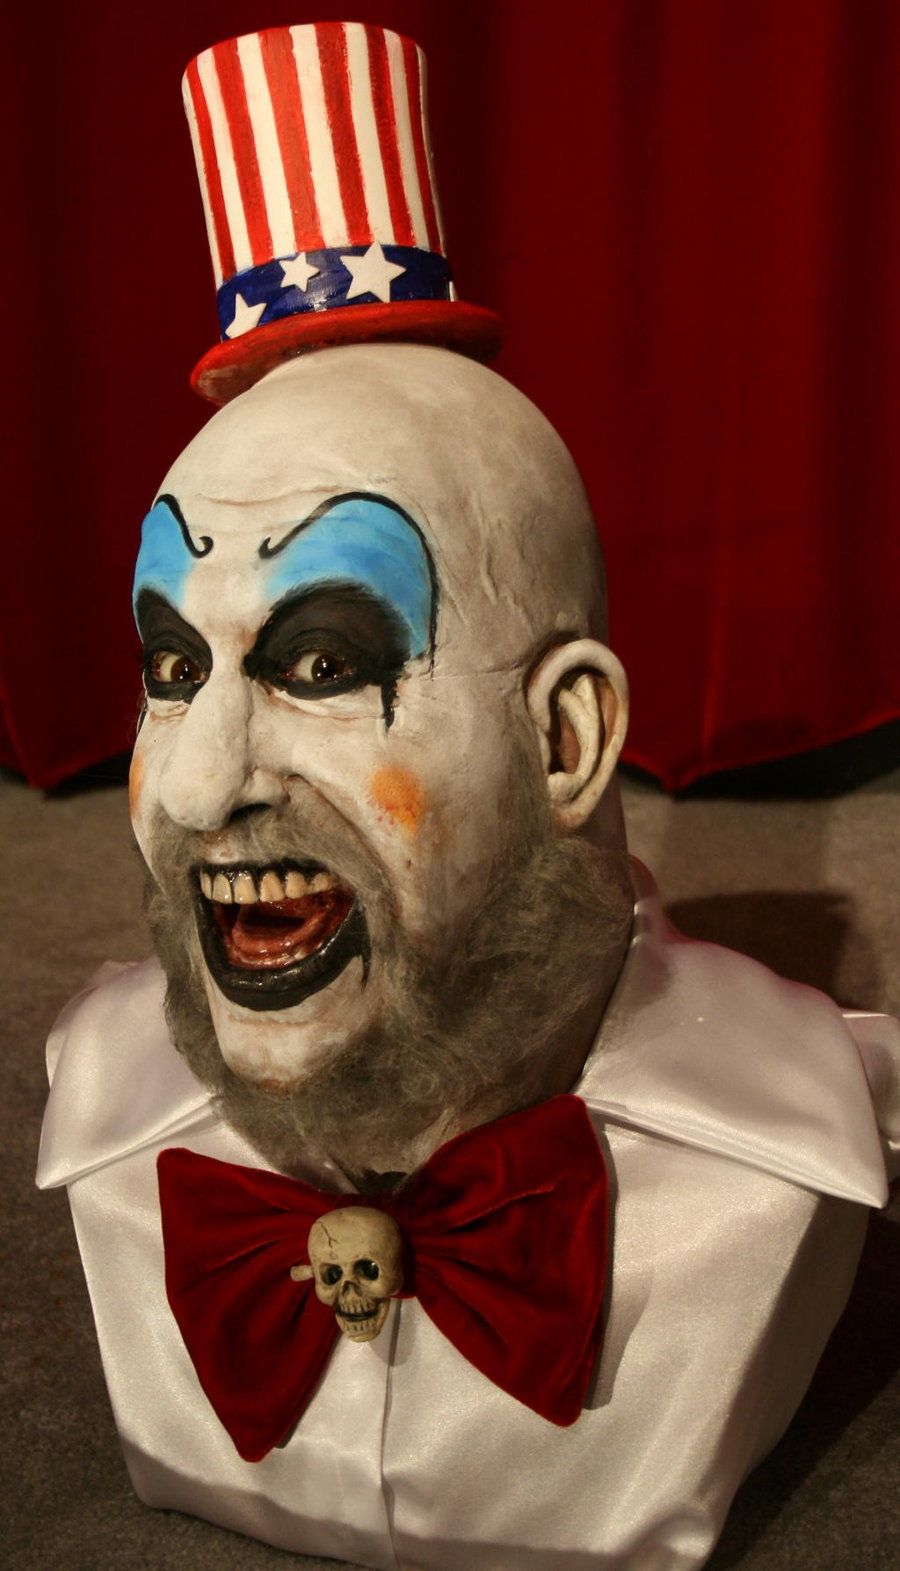 Full HD Image Collection of Captain Spaulding: Waldemar Ghidini.